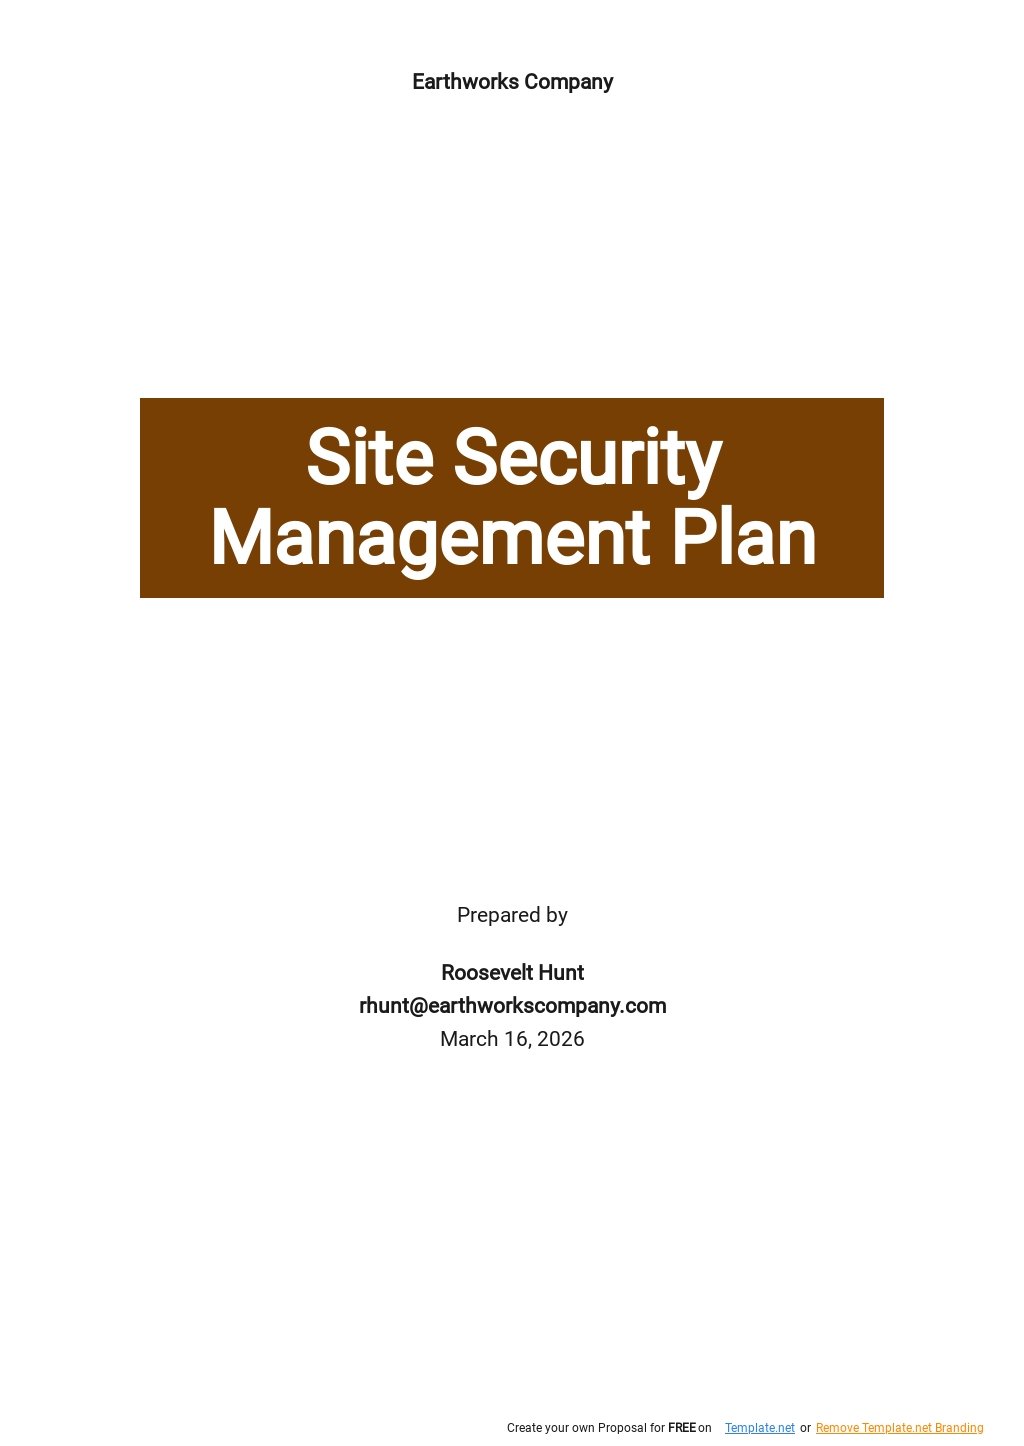 Site Security Management Plan Template